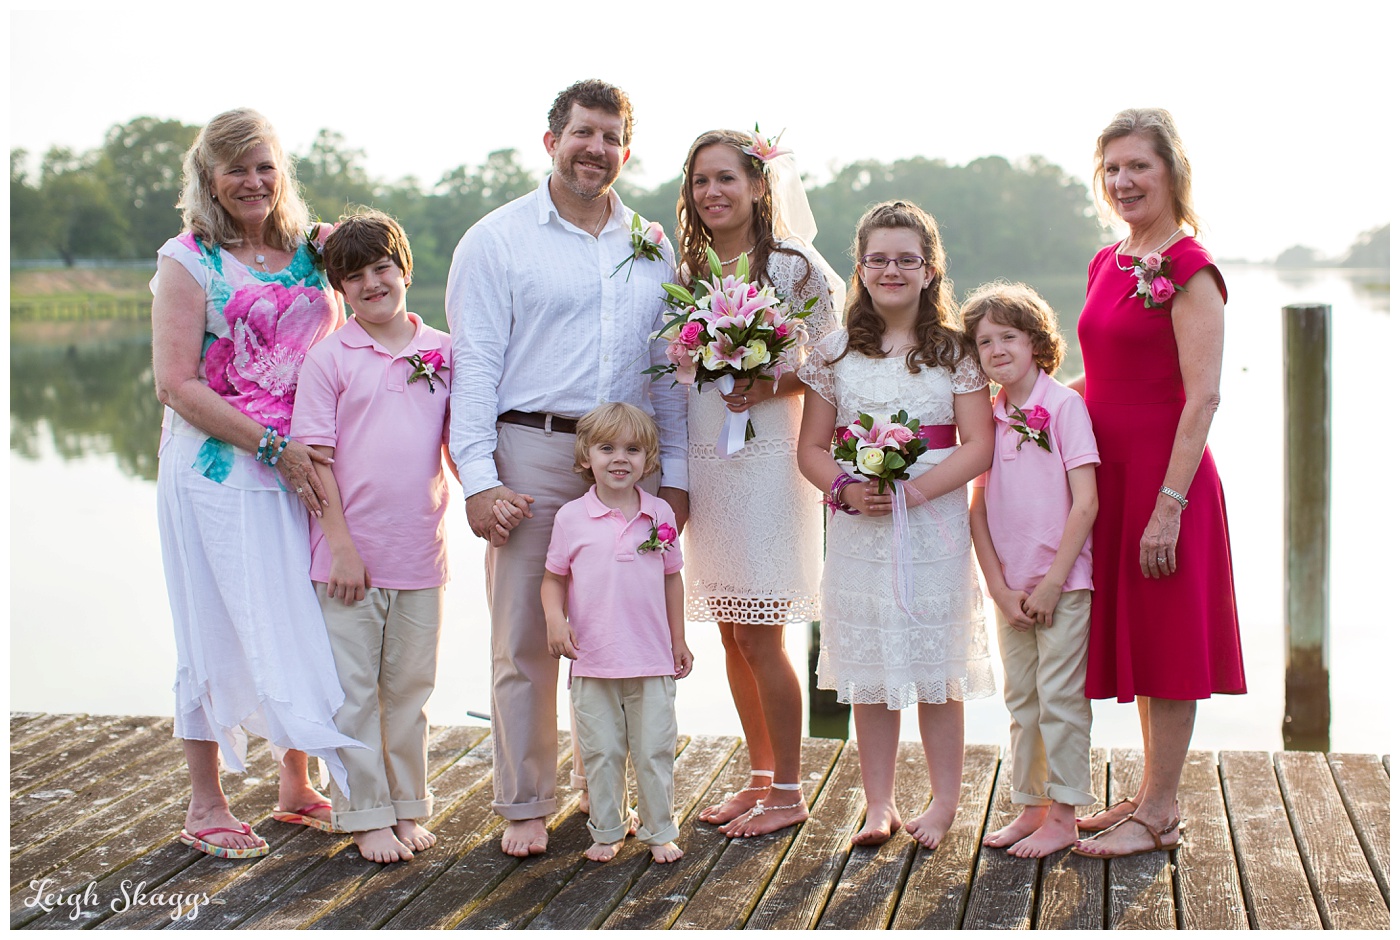 Ruth and Morgan are Married!  A Sneak Peek from their Cape Charles Eastern Shore Wedding!! 